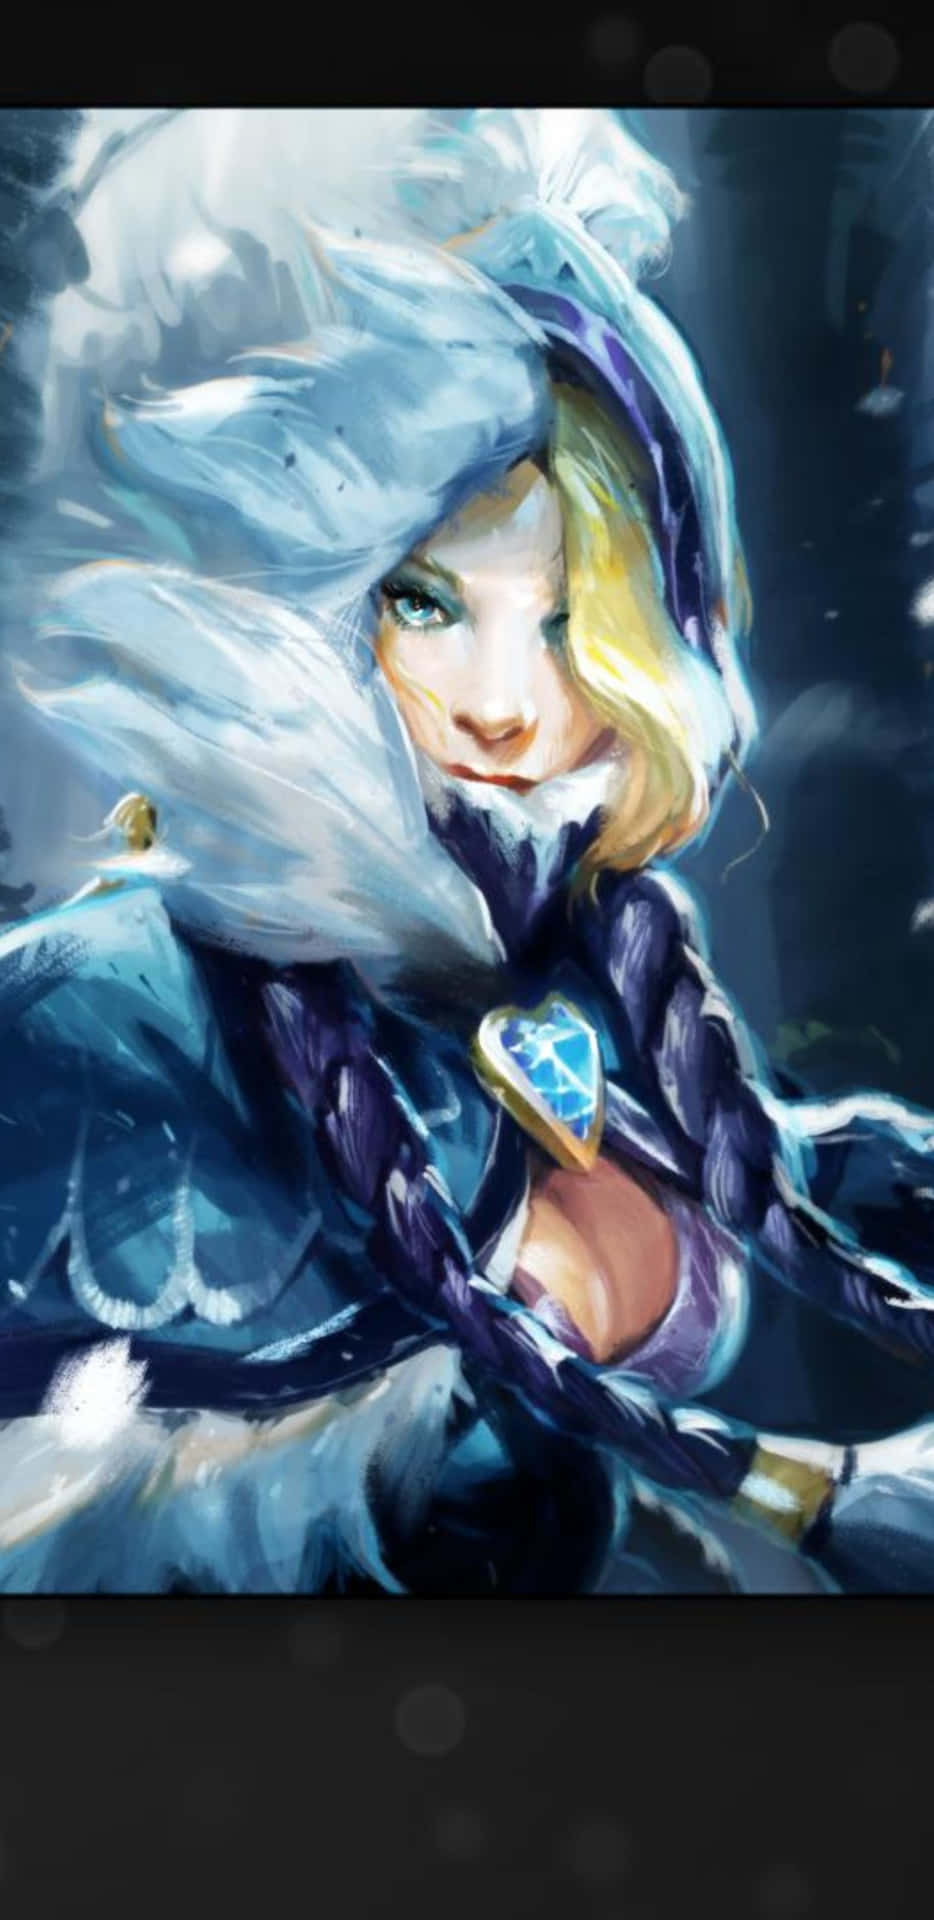 Pixel 3xl Dota 2 Background And Crystal Maiden